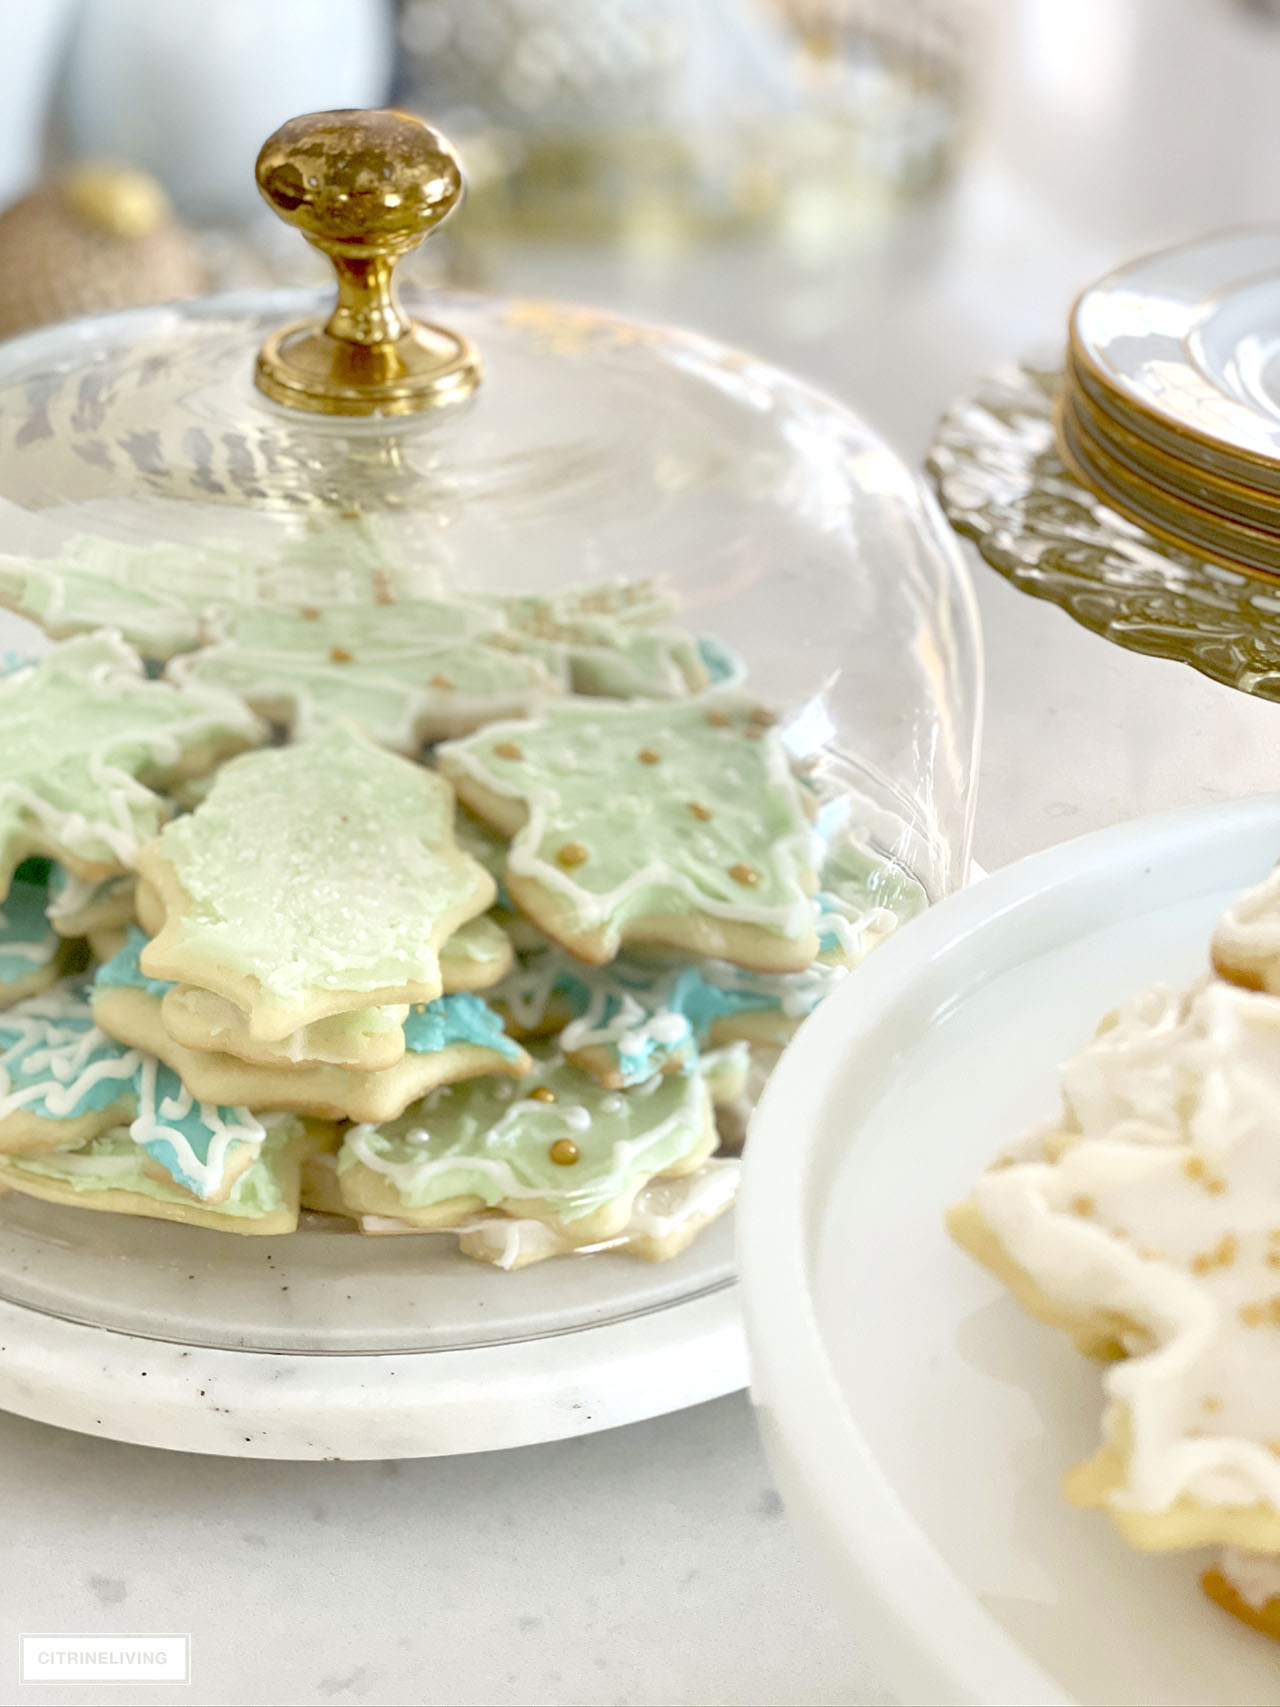 Cake stand with marble base and glass top filled with beautiful mint green and turquoise frosted Christmas cookies.